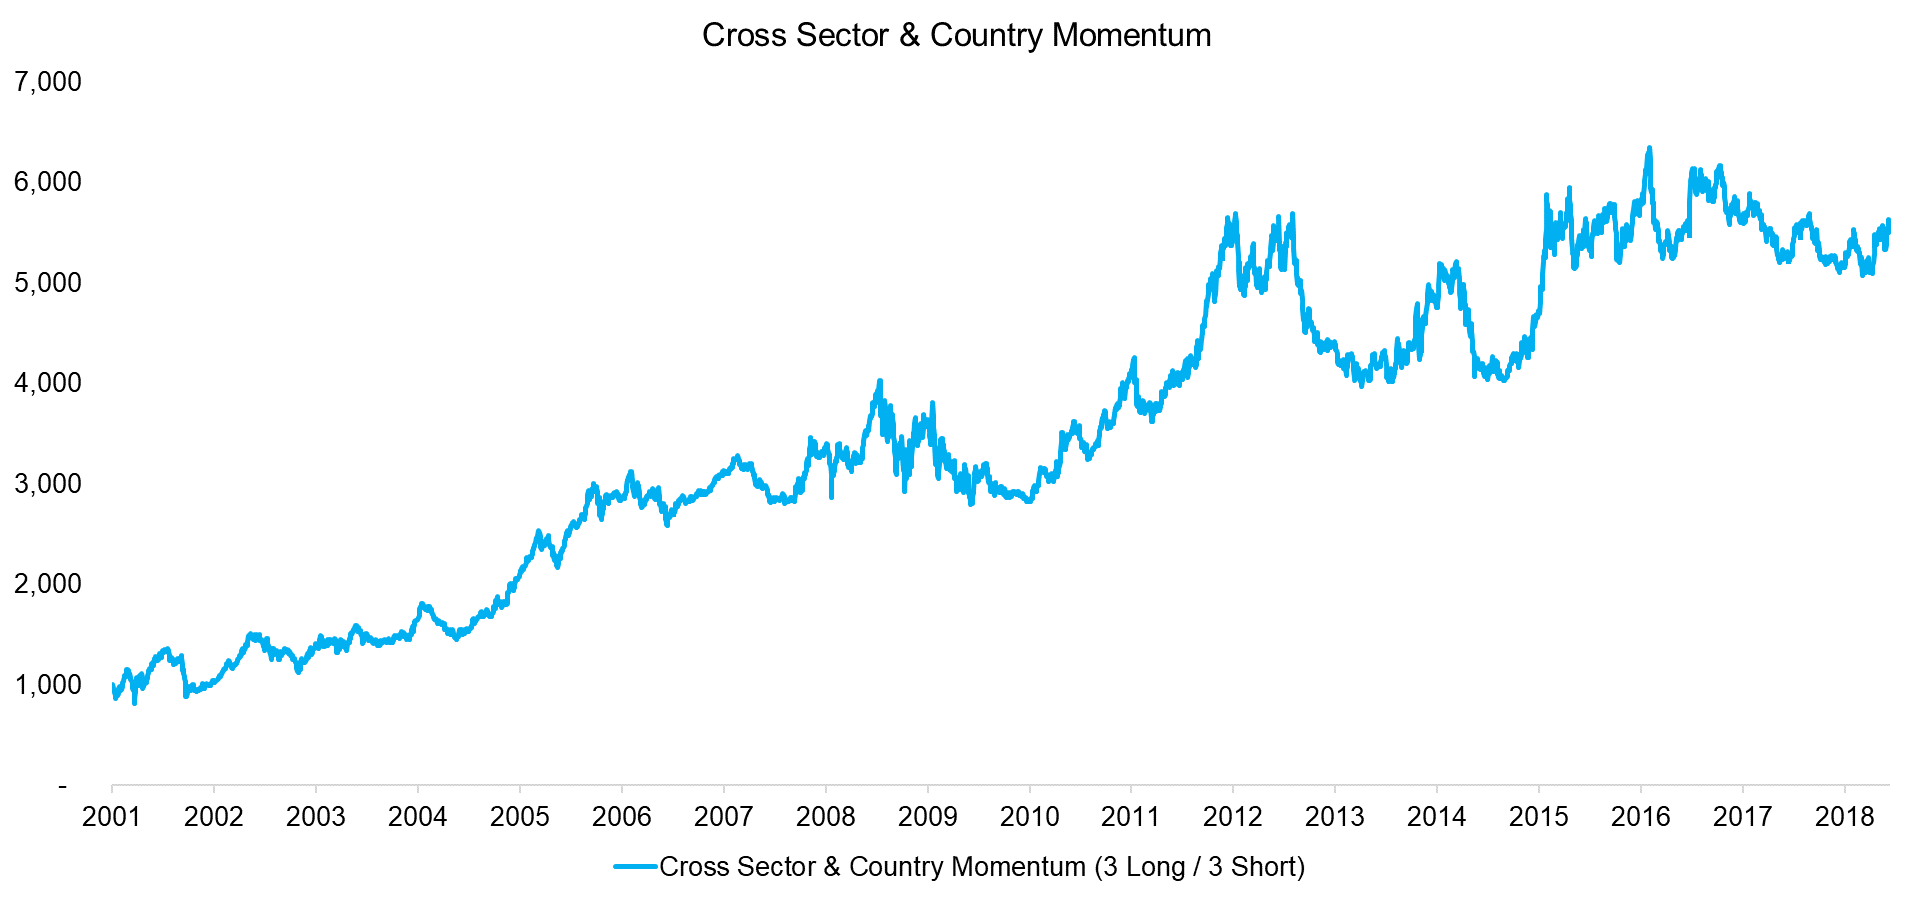 Cross Sector & Country Momentum